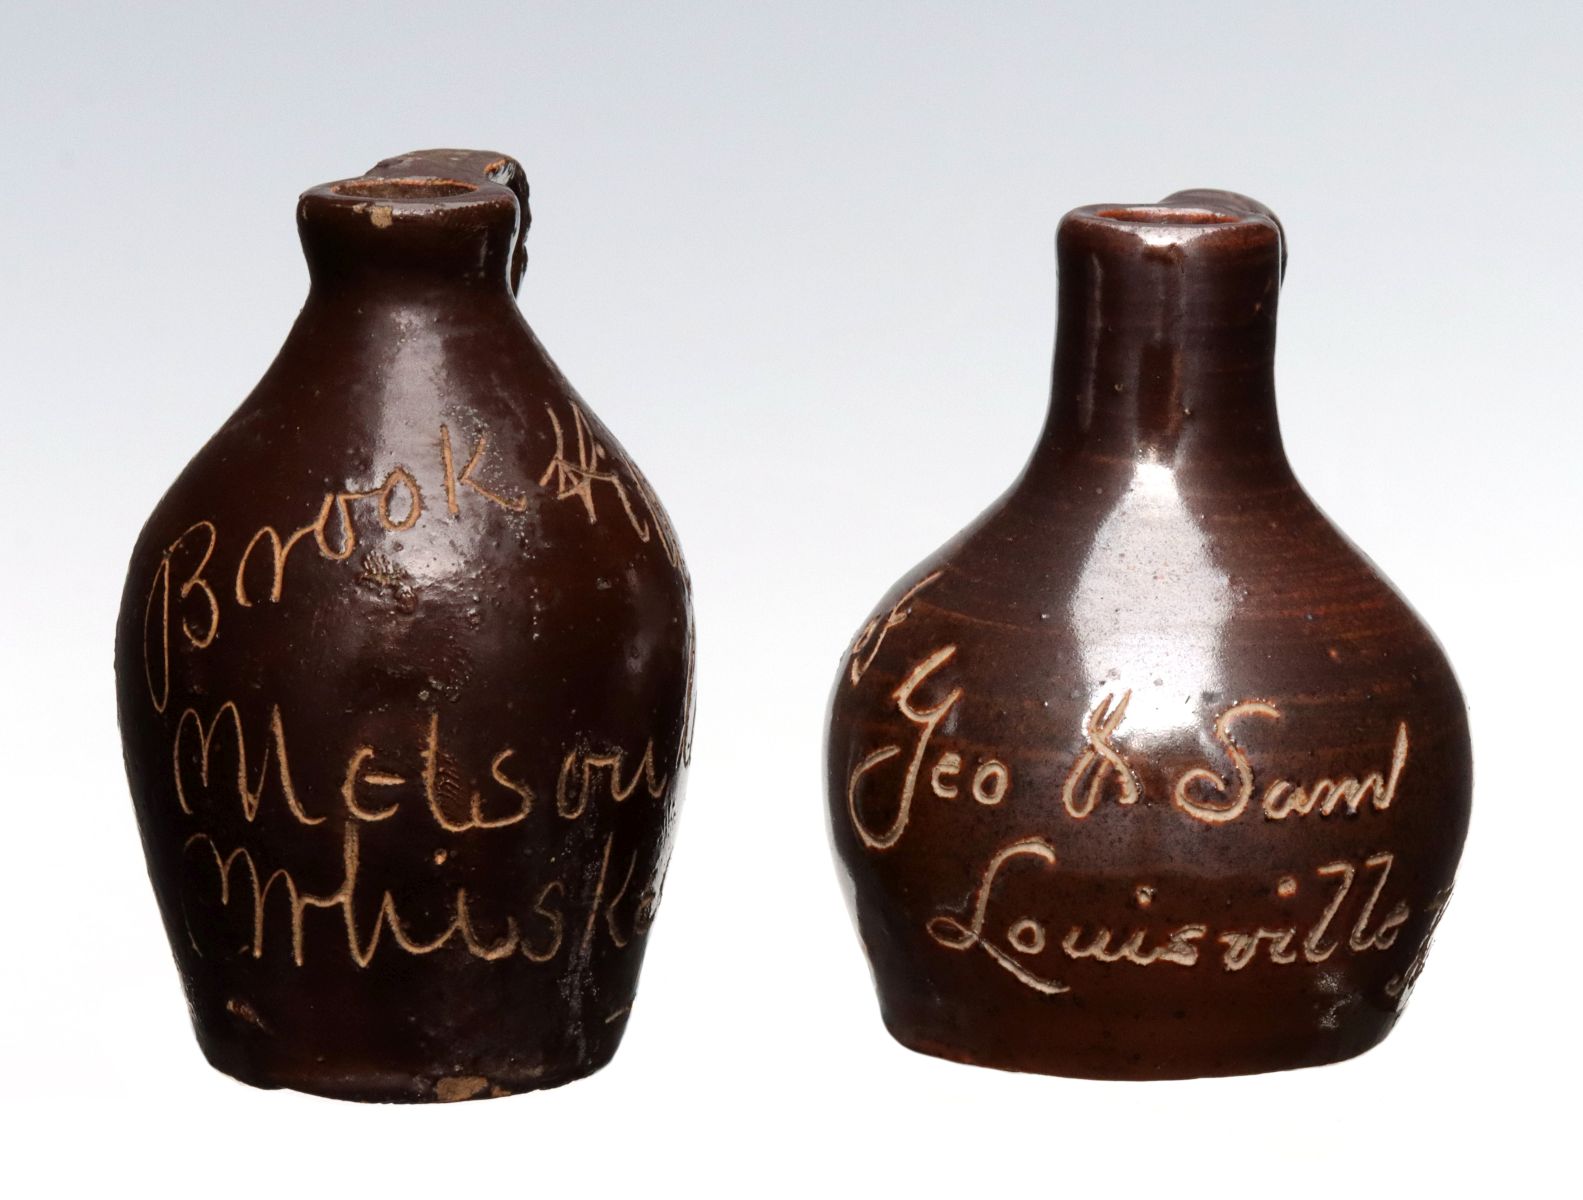 LOUISVILLE AND MELSORILES KENTUCKY MINI JUGS